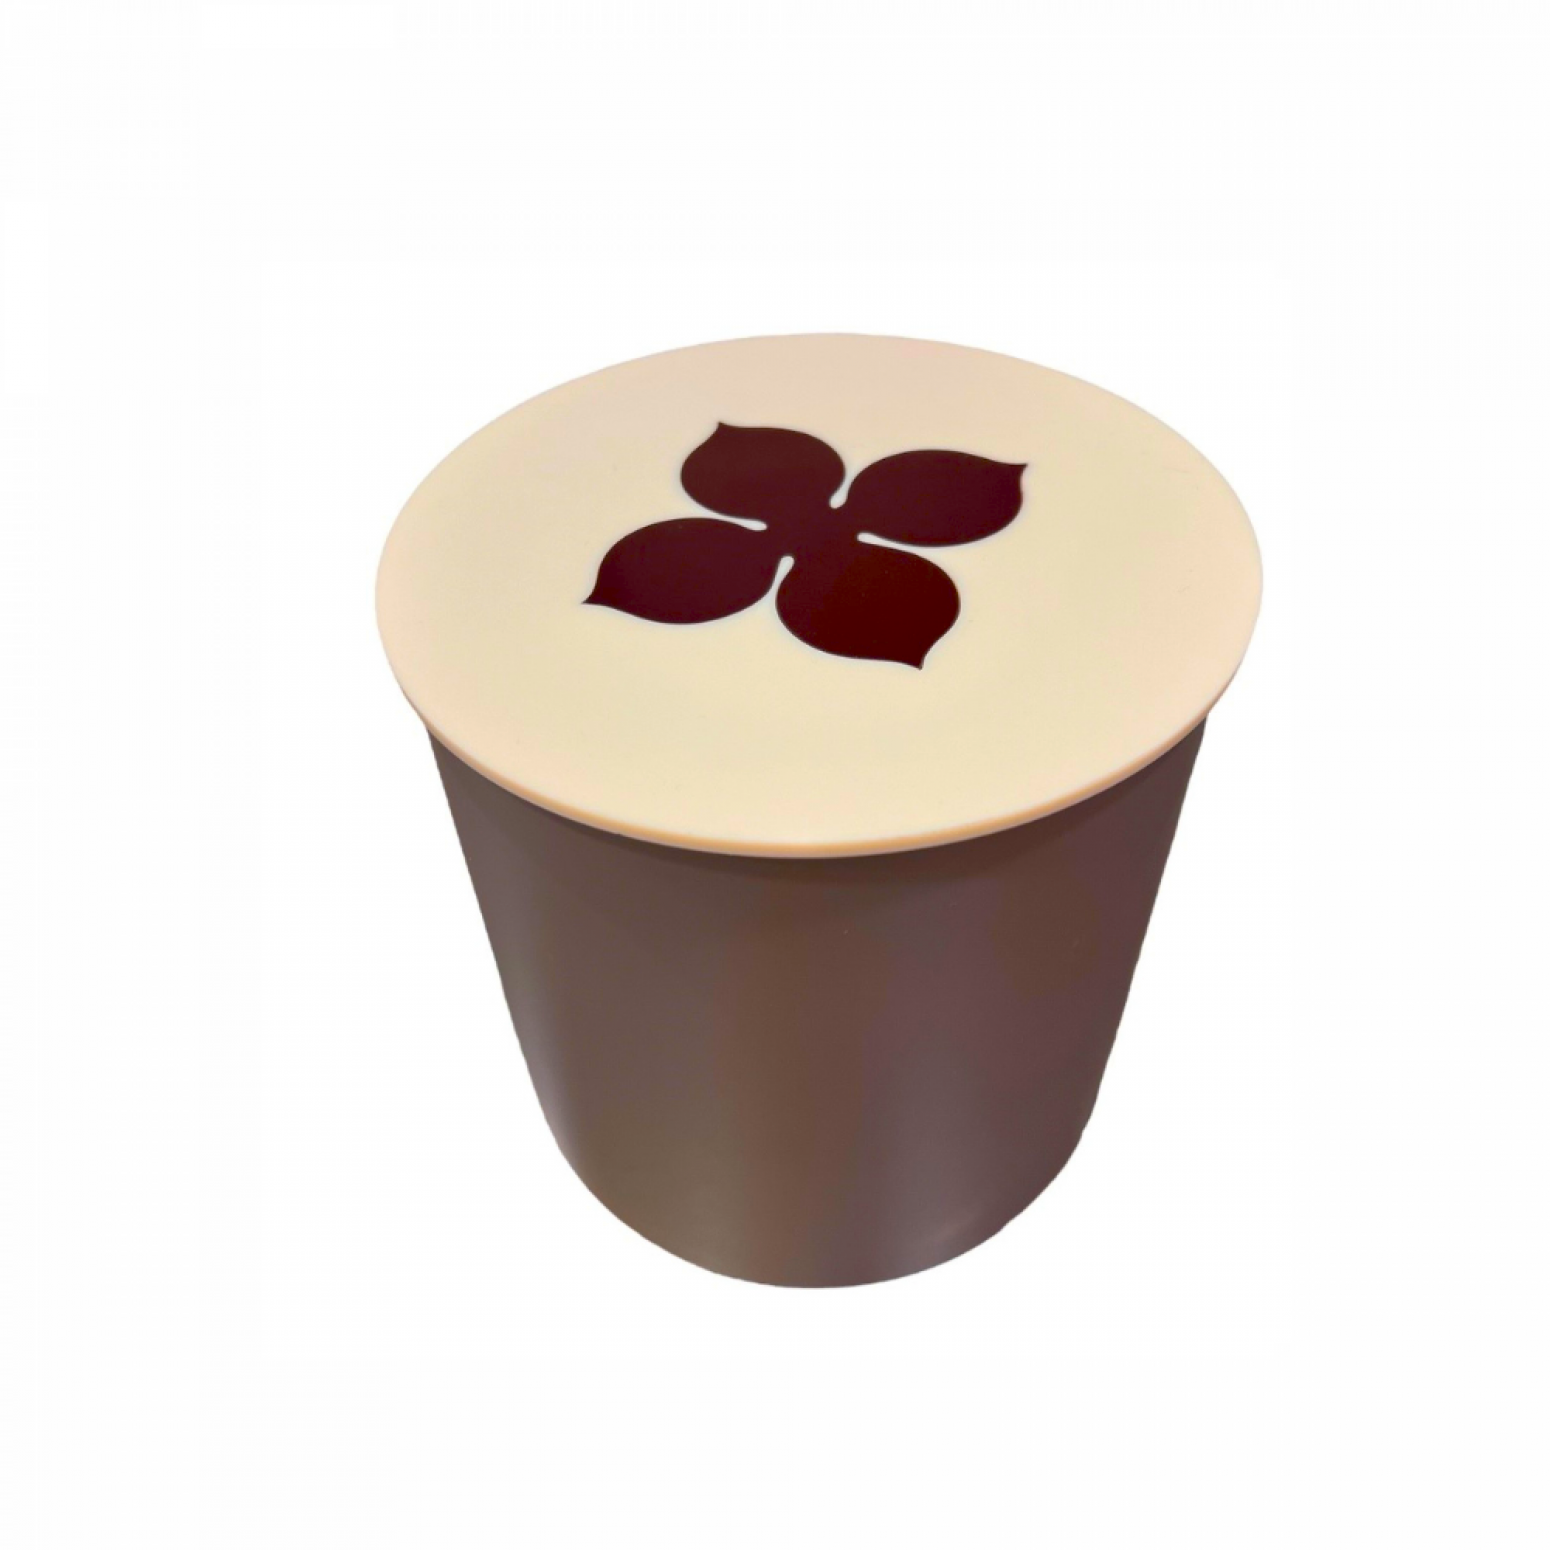 Scented candle with four-leaf clover 15.0cm x 15.0cm, ac1688 GIFTS Κοσμηματα - chrilia.gr